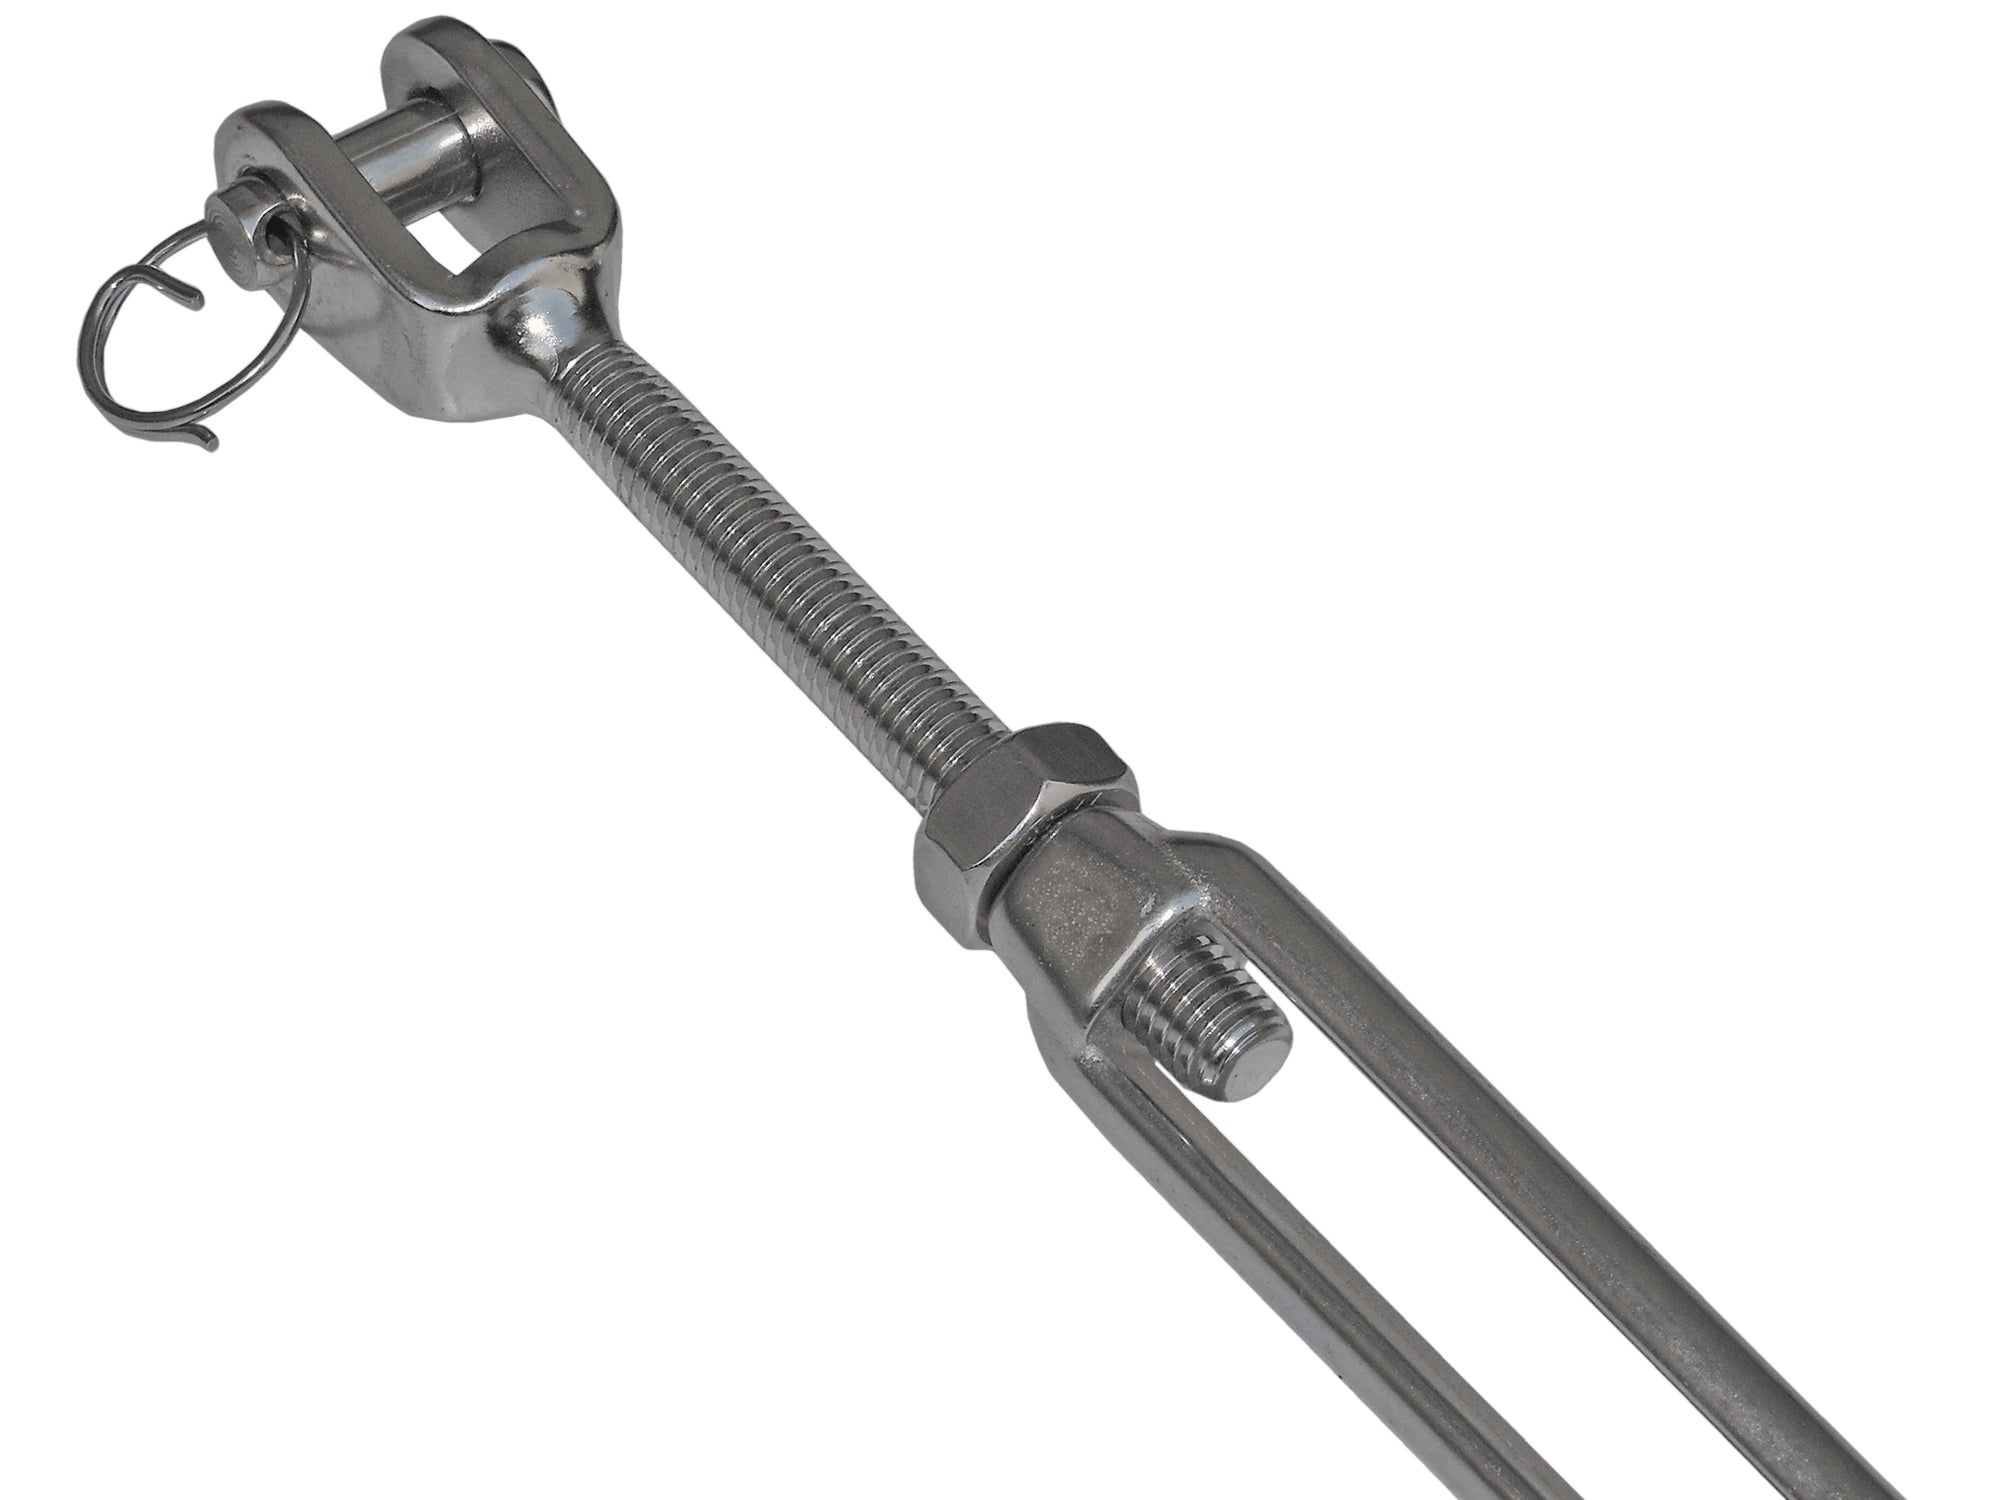 Stainless Steel 6mm Open Body Turnbuckle (JIS) Jaw/jaw - FO-2947